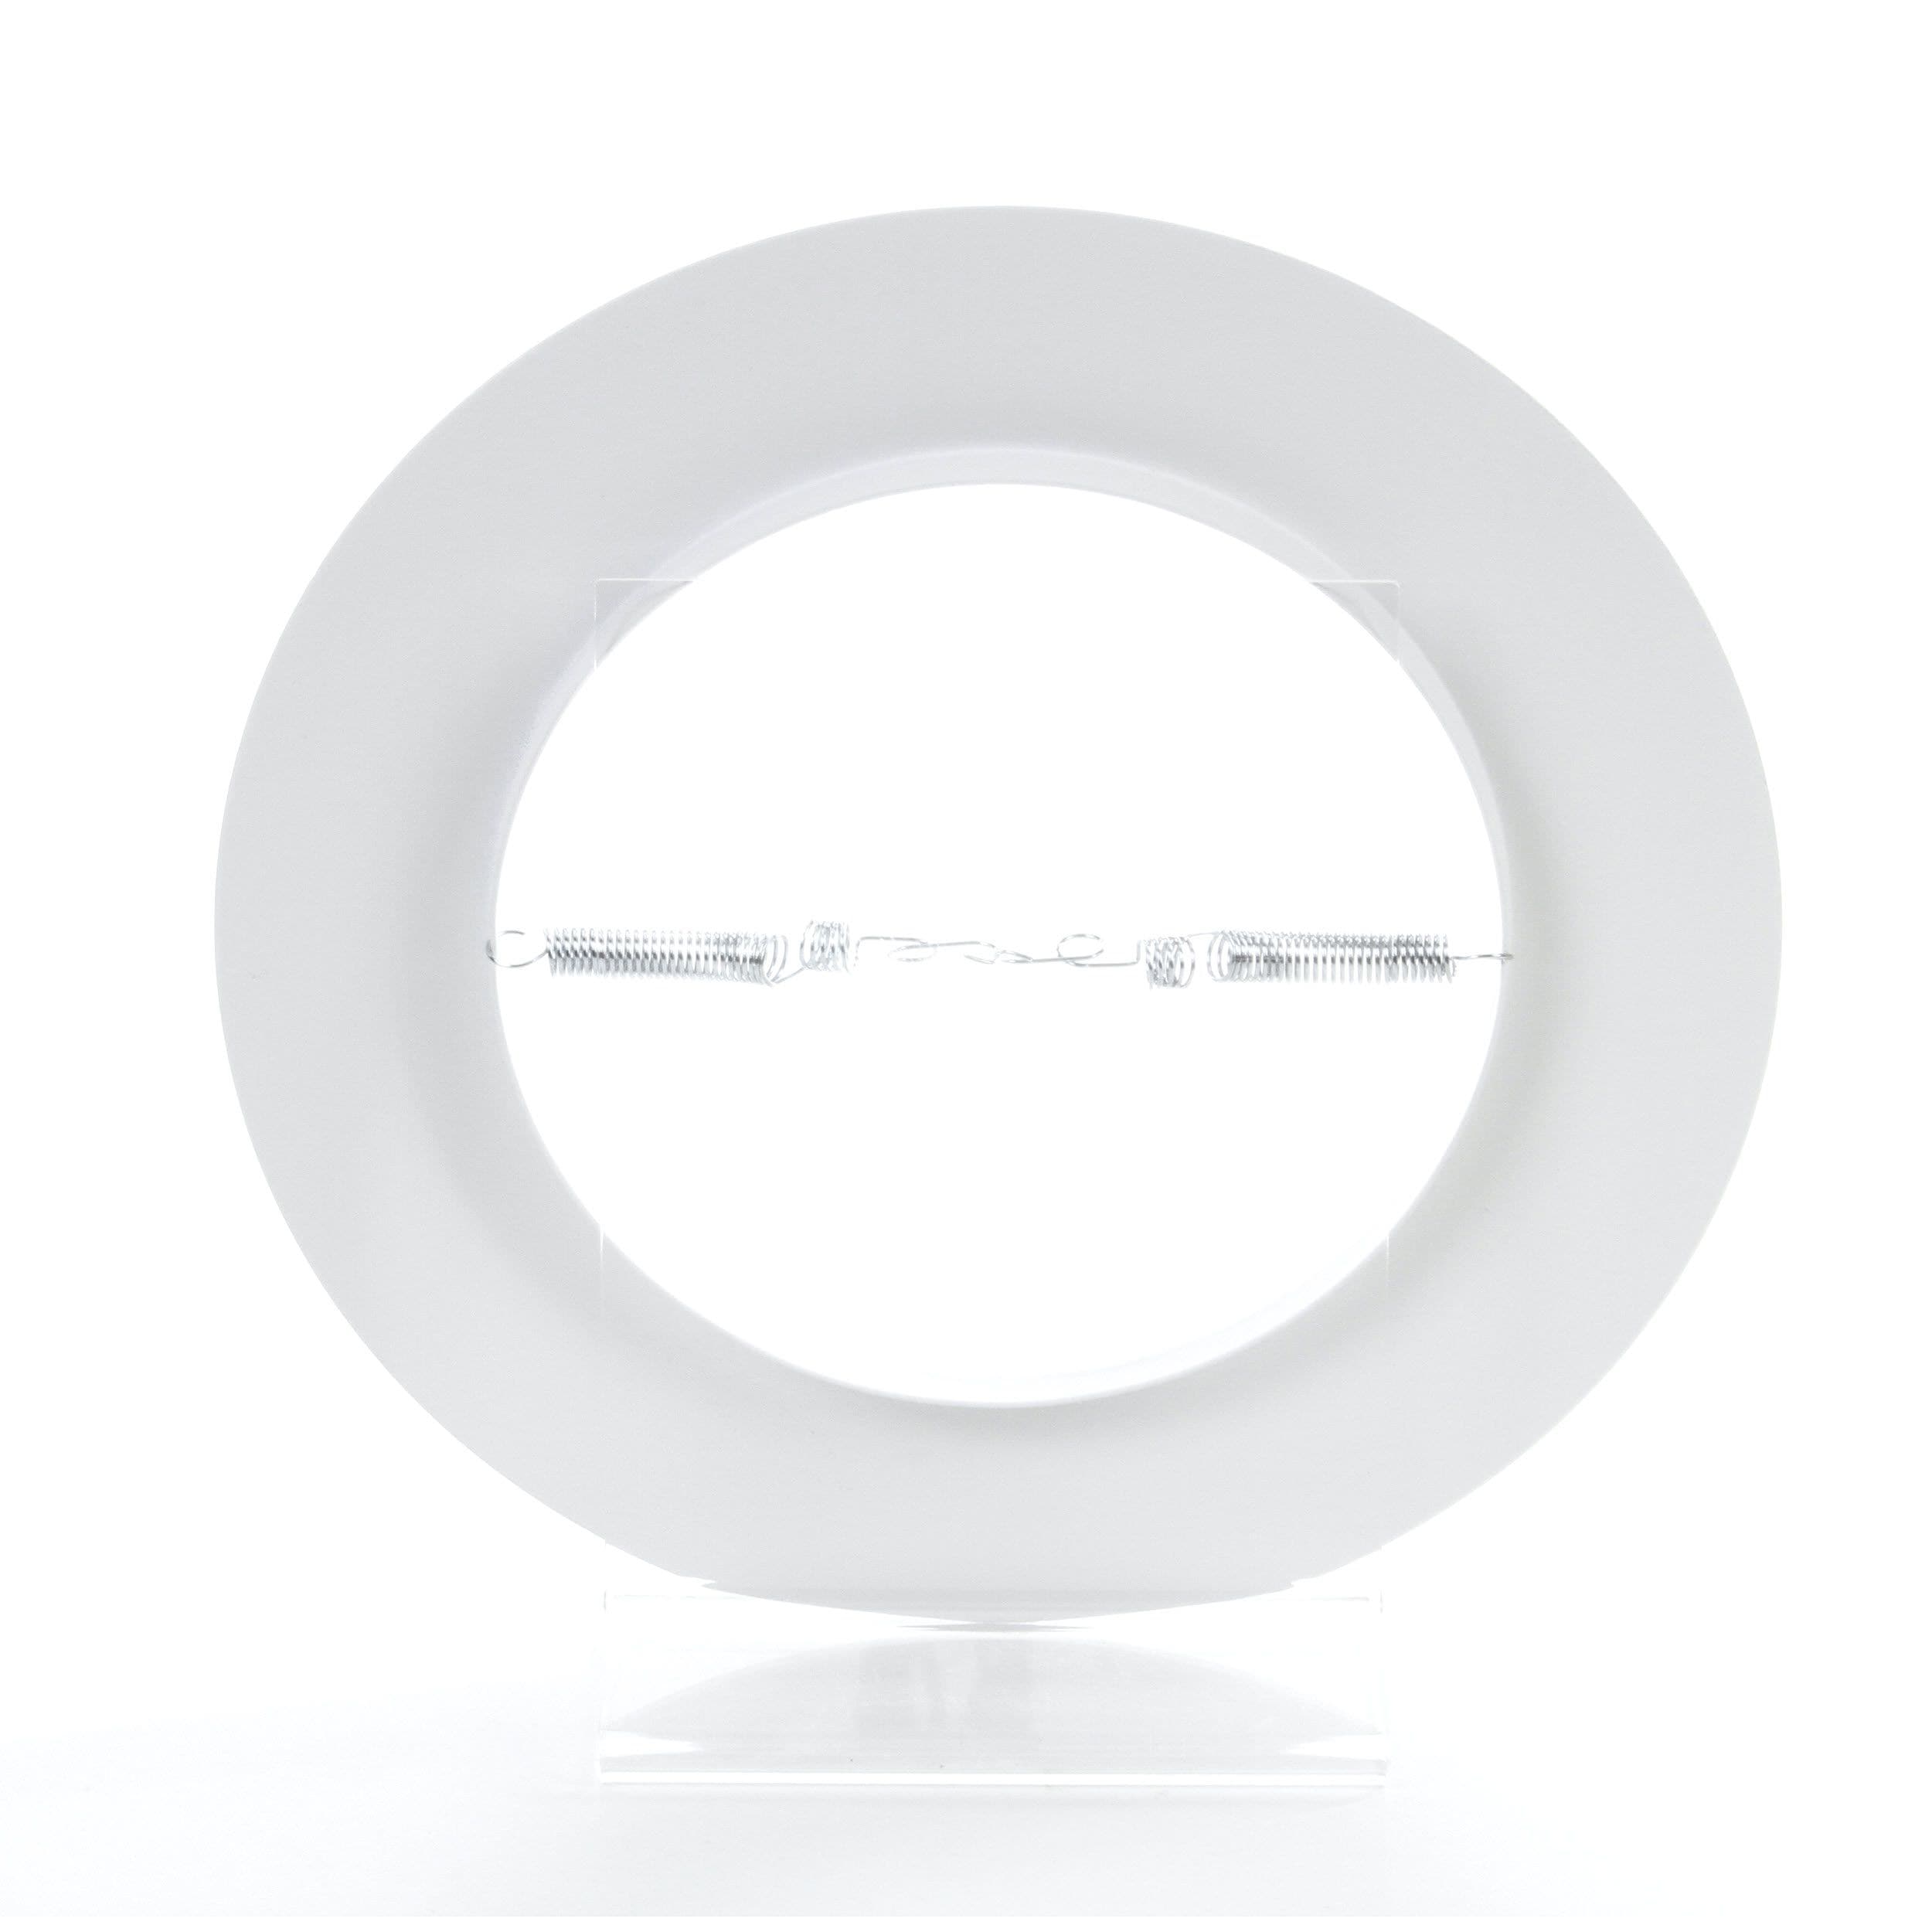 NIB! S&H Halo 401P 6" FREE US 4 White Open Trim Ring for Recessed Light 